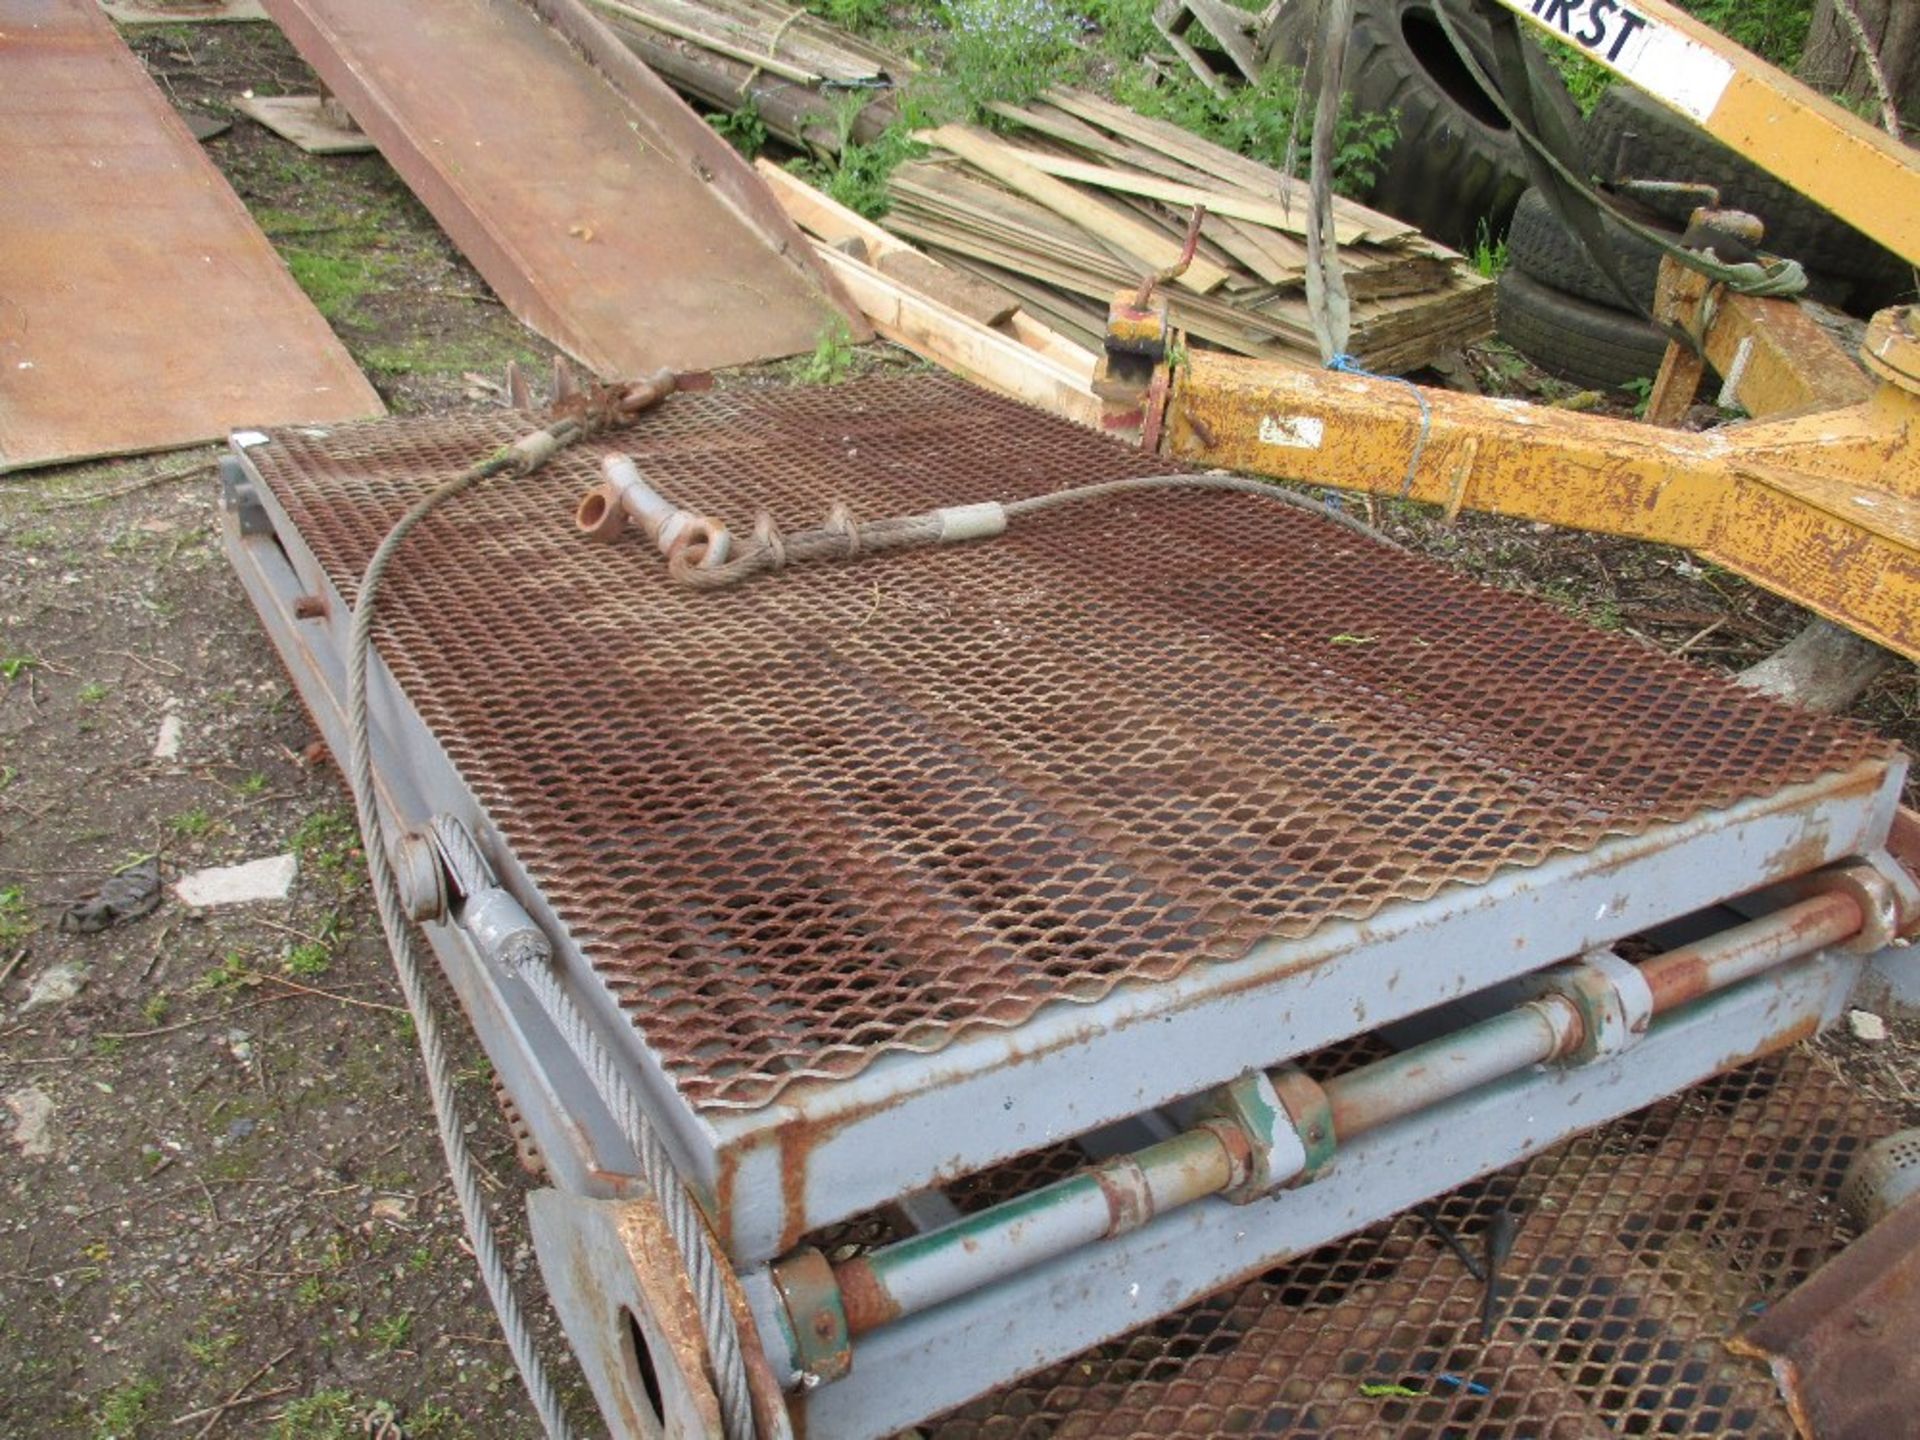 HEAVY DUTY BEAVERTAIL LORRY RAMP ASSEMBLY WITH RAMS AND PUMP AS SHOWN. FLIP TOE TYPE. - Image 4 of 5